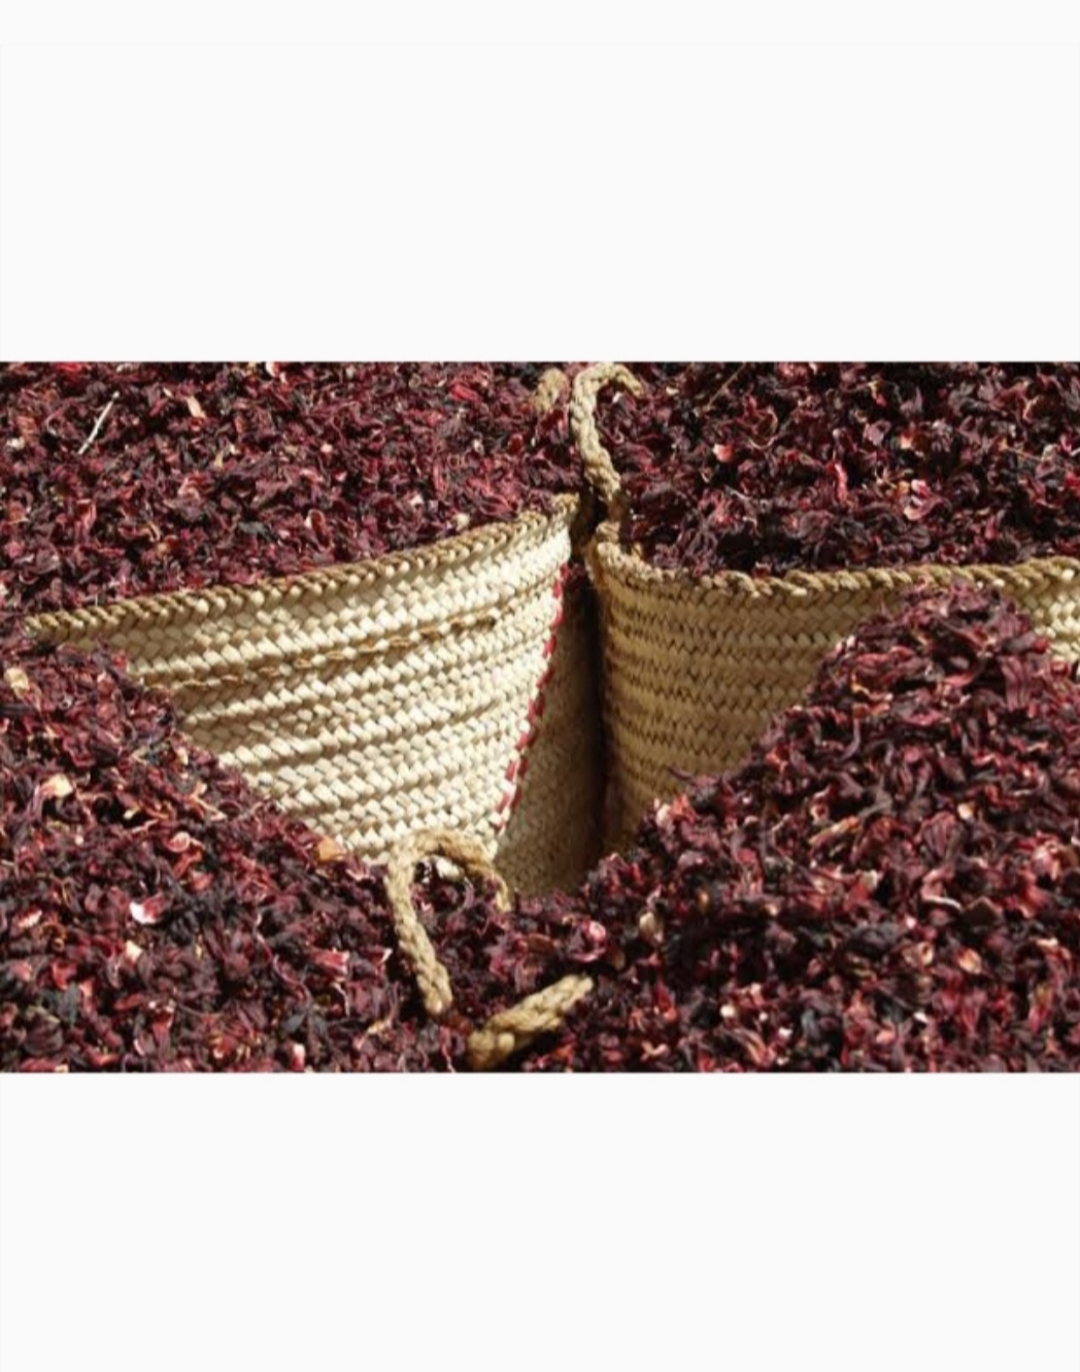 Product image - Dried hibiscus flower, well packed